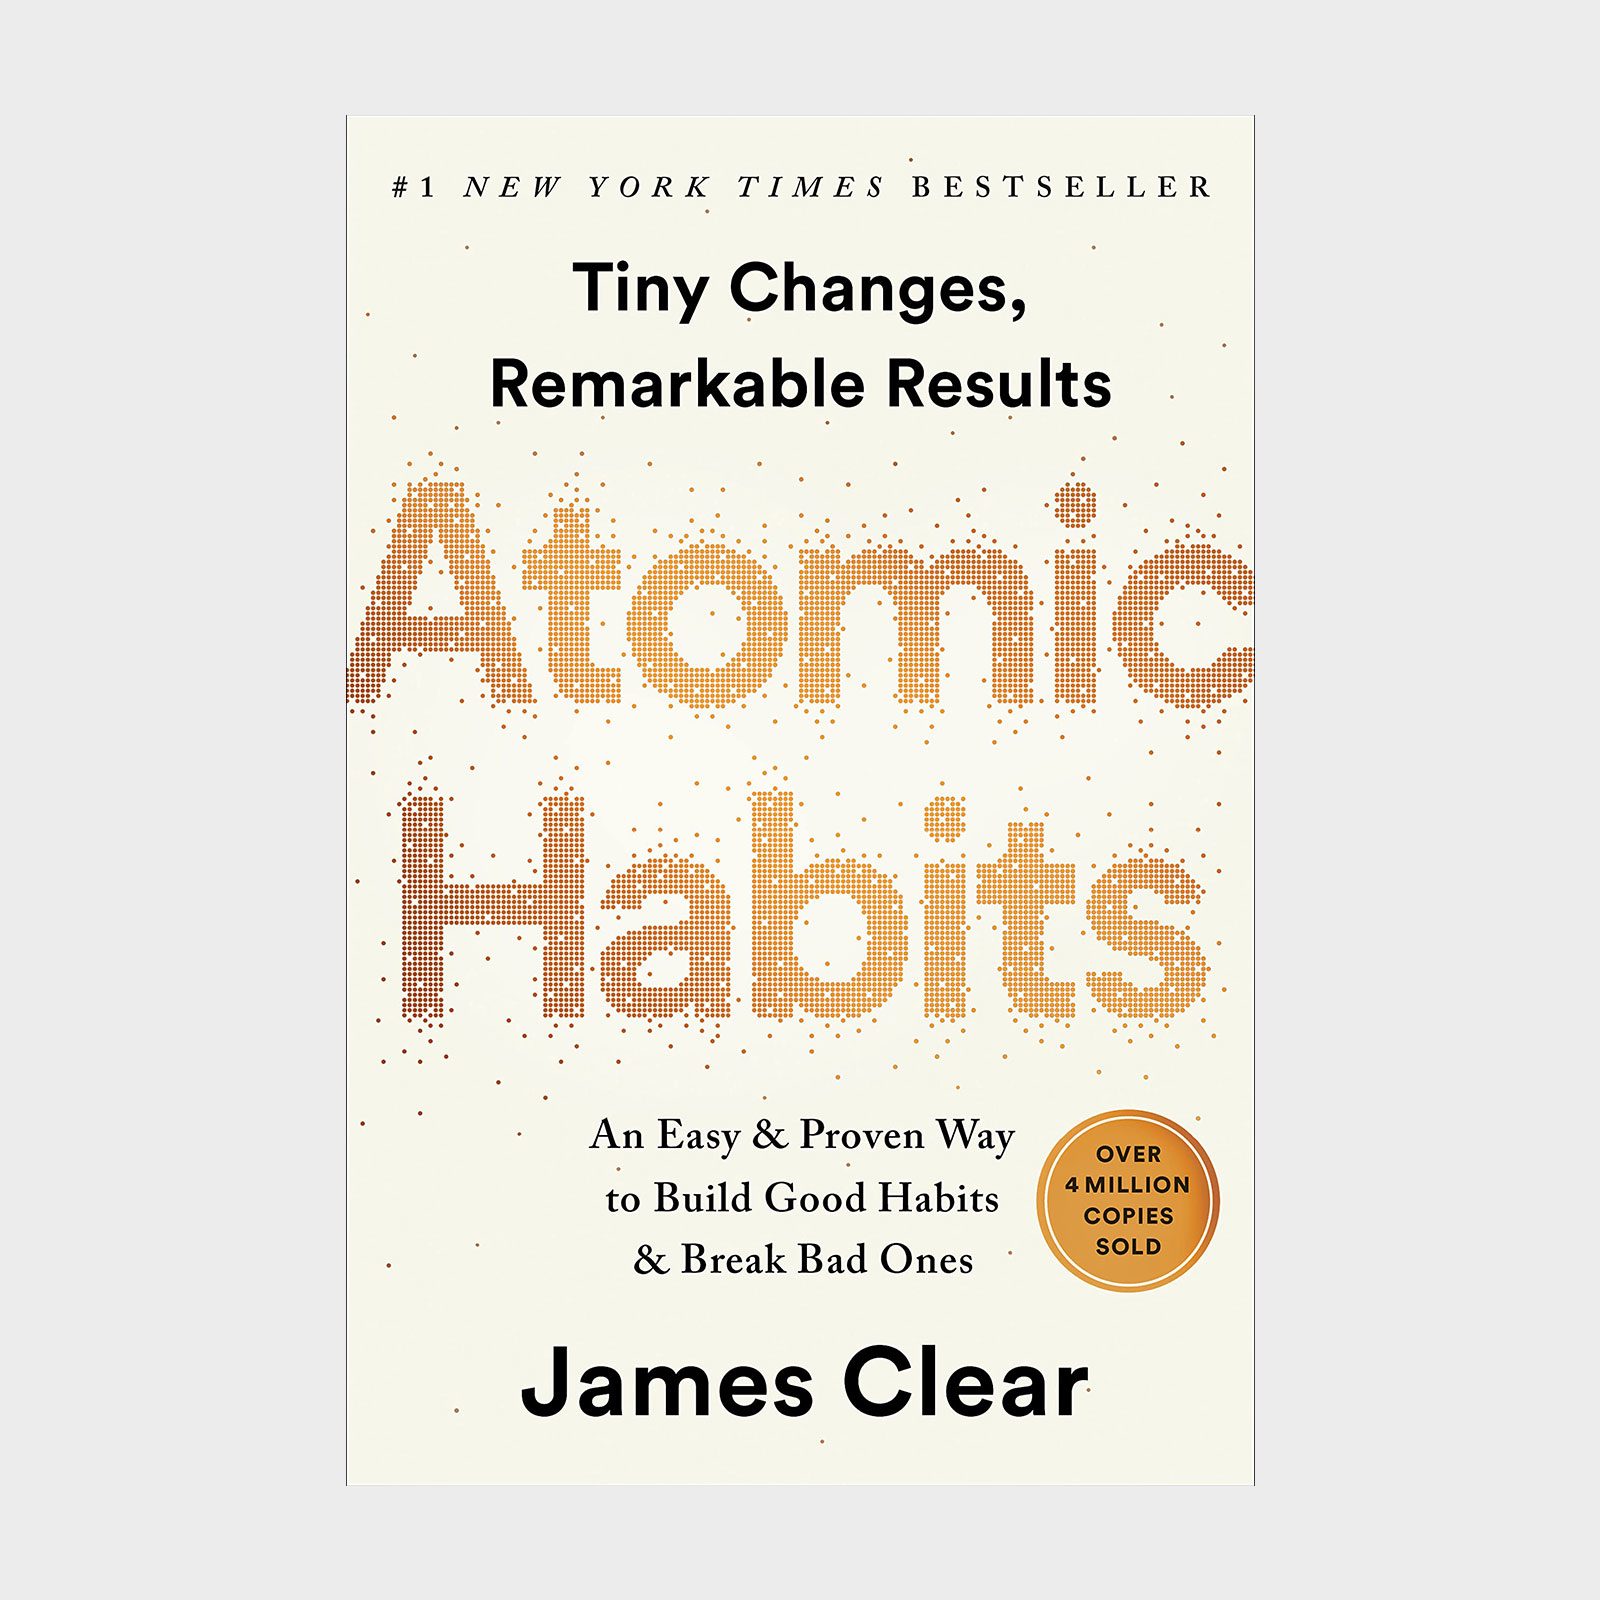 <p>From the world's leading expert on habit formation, James Clear, comes a transformative book that walks readers through specific strategies and systems that will help you form good habits and break bad ones. Published in 2018, <a href="https://www.amazon.com/Atomic-Habits-Proven-Build-Break/dp/0735211299" rel="noopener"><em>Atomic Habits: Tiny Changes, Remarkable Results</em></a> provides real-life stories from Olympians, physicians, leaders and award-winning artists who have mastered their craft by changing simple behaviors and understanding the importance of a growth mindset (check out these mindset quotes for more). It's a remarkable read if you want to get on track to finding success in your own life.</p> <p class="listicle-page__cta-button-shop"><a class="shop-btn" href="https://www.amazon.com/Atomic-Habits-Proven-Build-Break/dp/0735211299/">Shop Now</a></p>